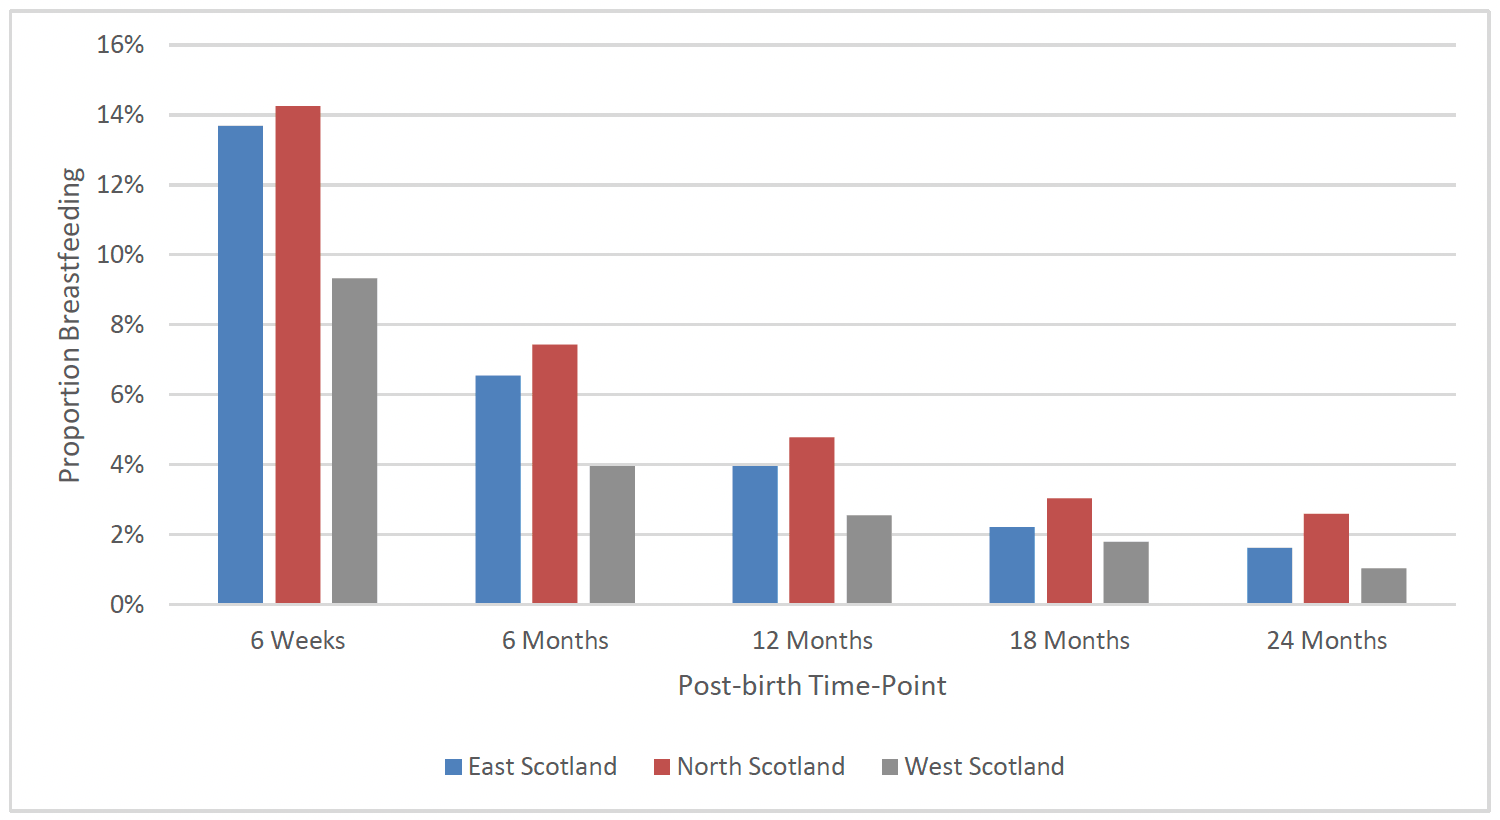 Chart 36 shows the proportion of FNP clients breastfeeding at 6 weeks, 6 months, 12 months , 18 months and 24 months post-birth, by region of Scotland. At each time-point there was a higher proportion breastfeeding in the North, followed by the East and then the West of Scotland.